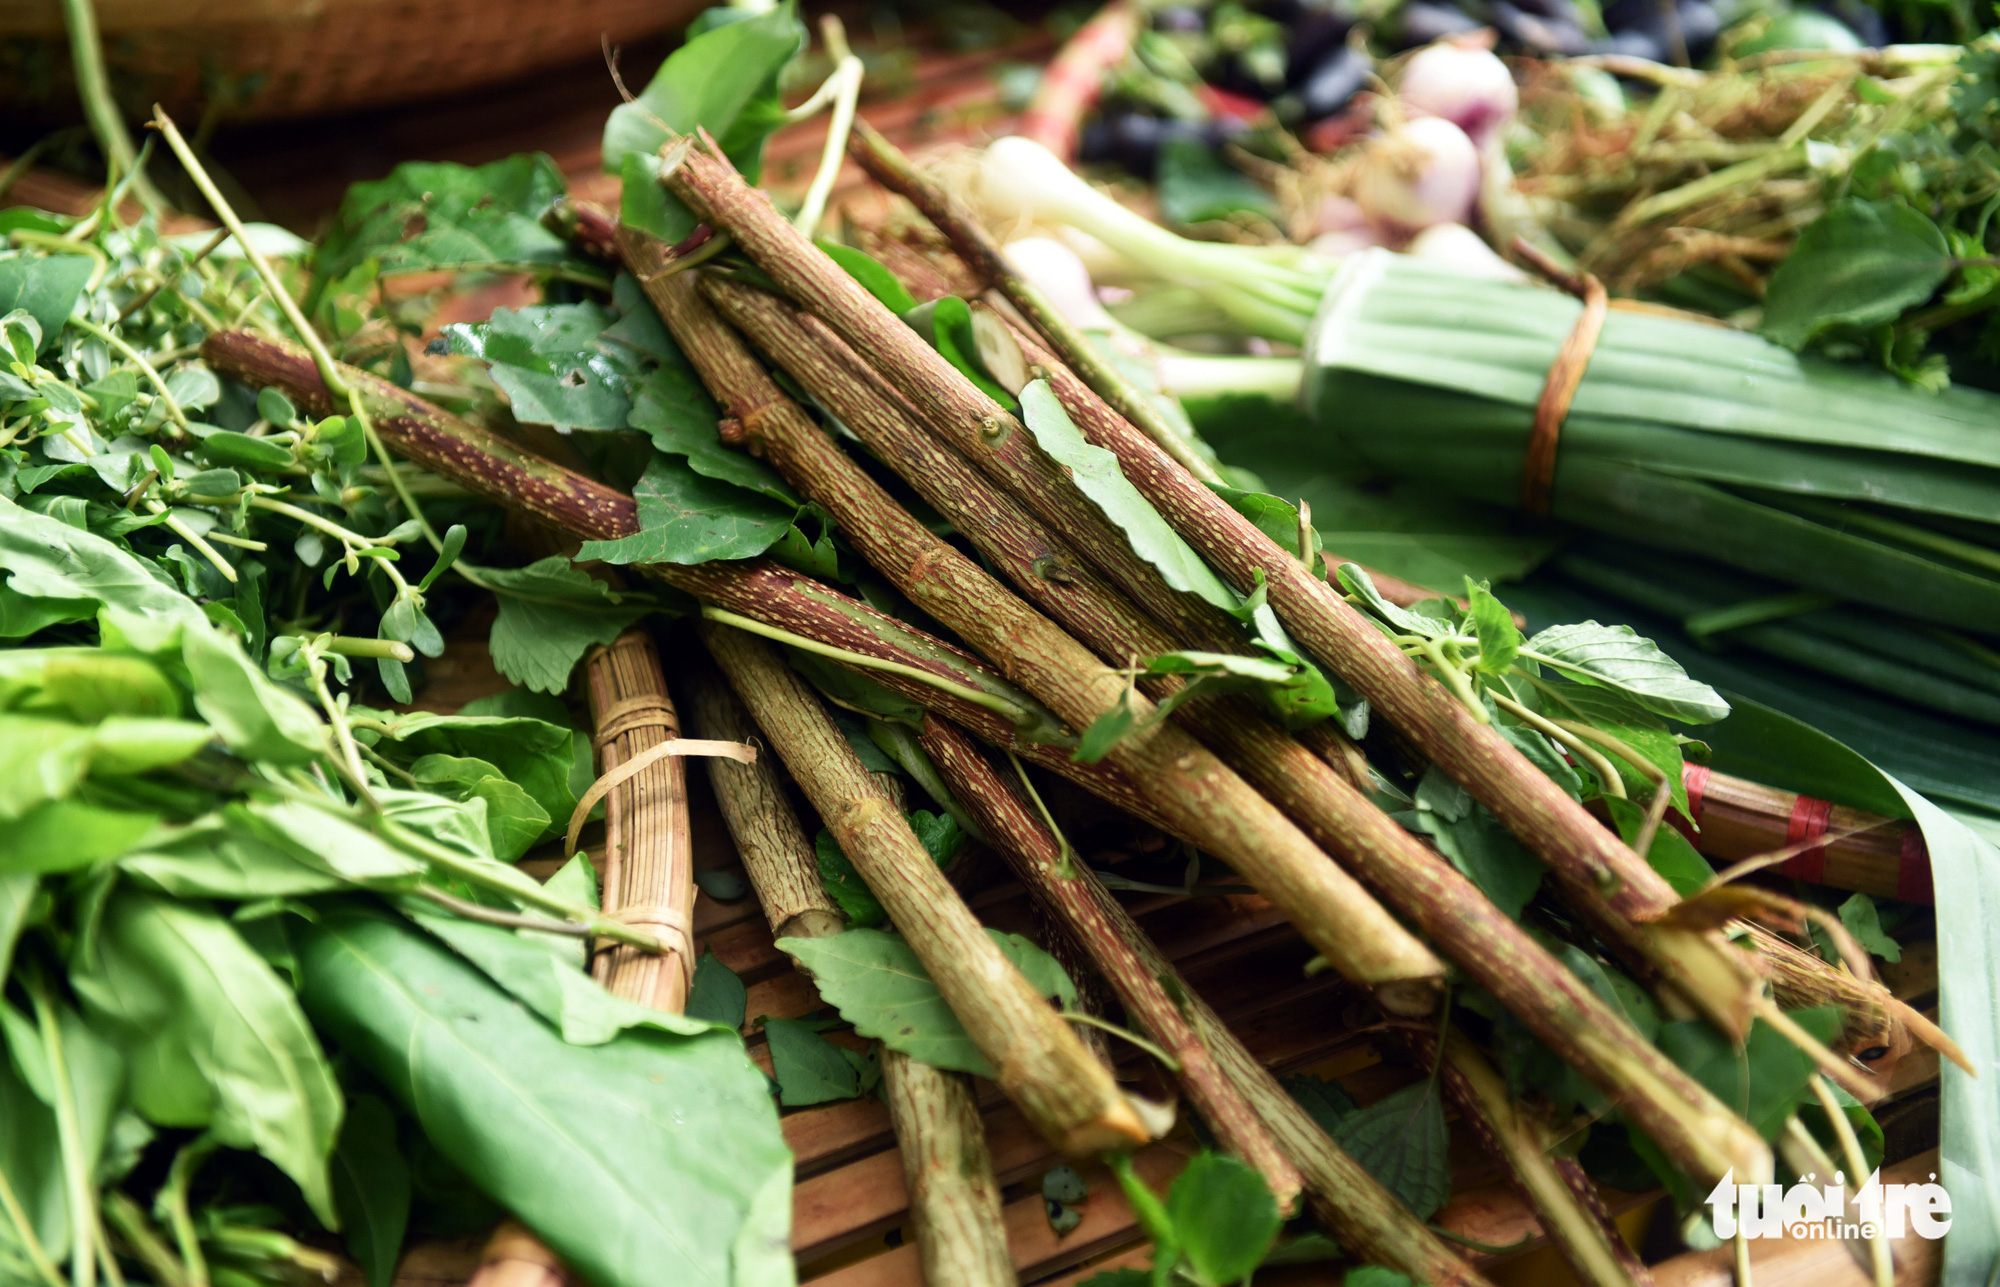 A stack of creek premna, a kind of plant commonly boiled for drinks in Vietnam, is seen at a ‘countryside market’ at No. 7 Nguyen Thi Minh Khai Street, District 1, Ho Chi Minh City, Vietnam, May 24, 2020. Photo: Duyen Phan / Tuoi Tre